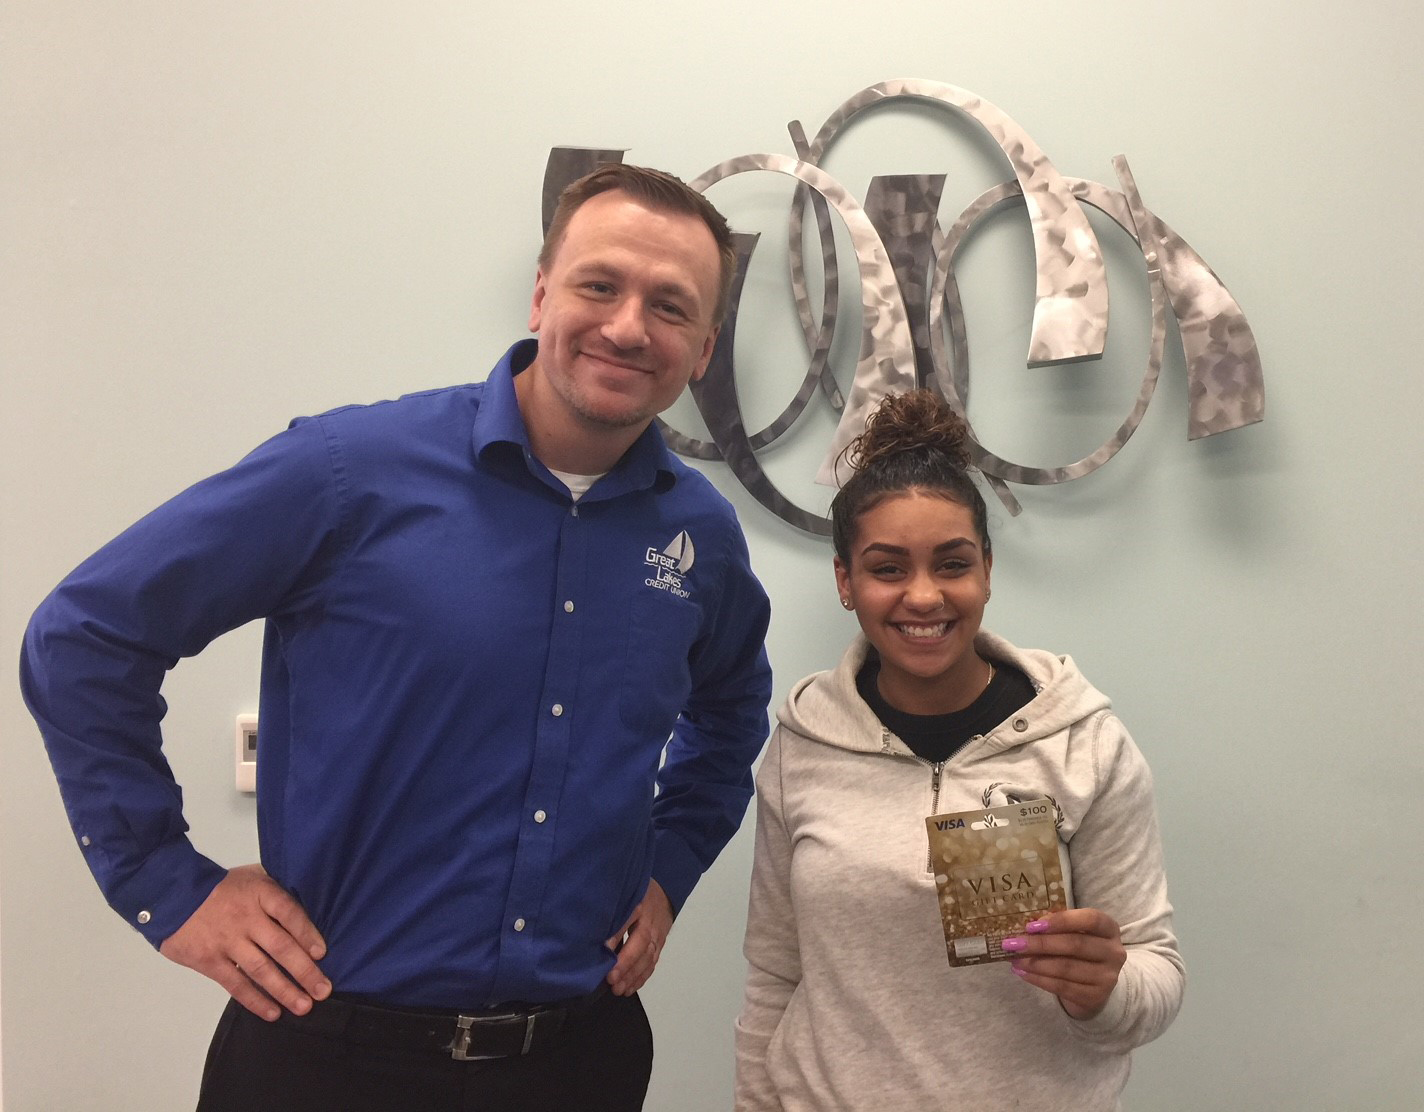 Youth savings month winner holding up her VISA gift card